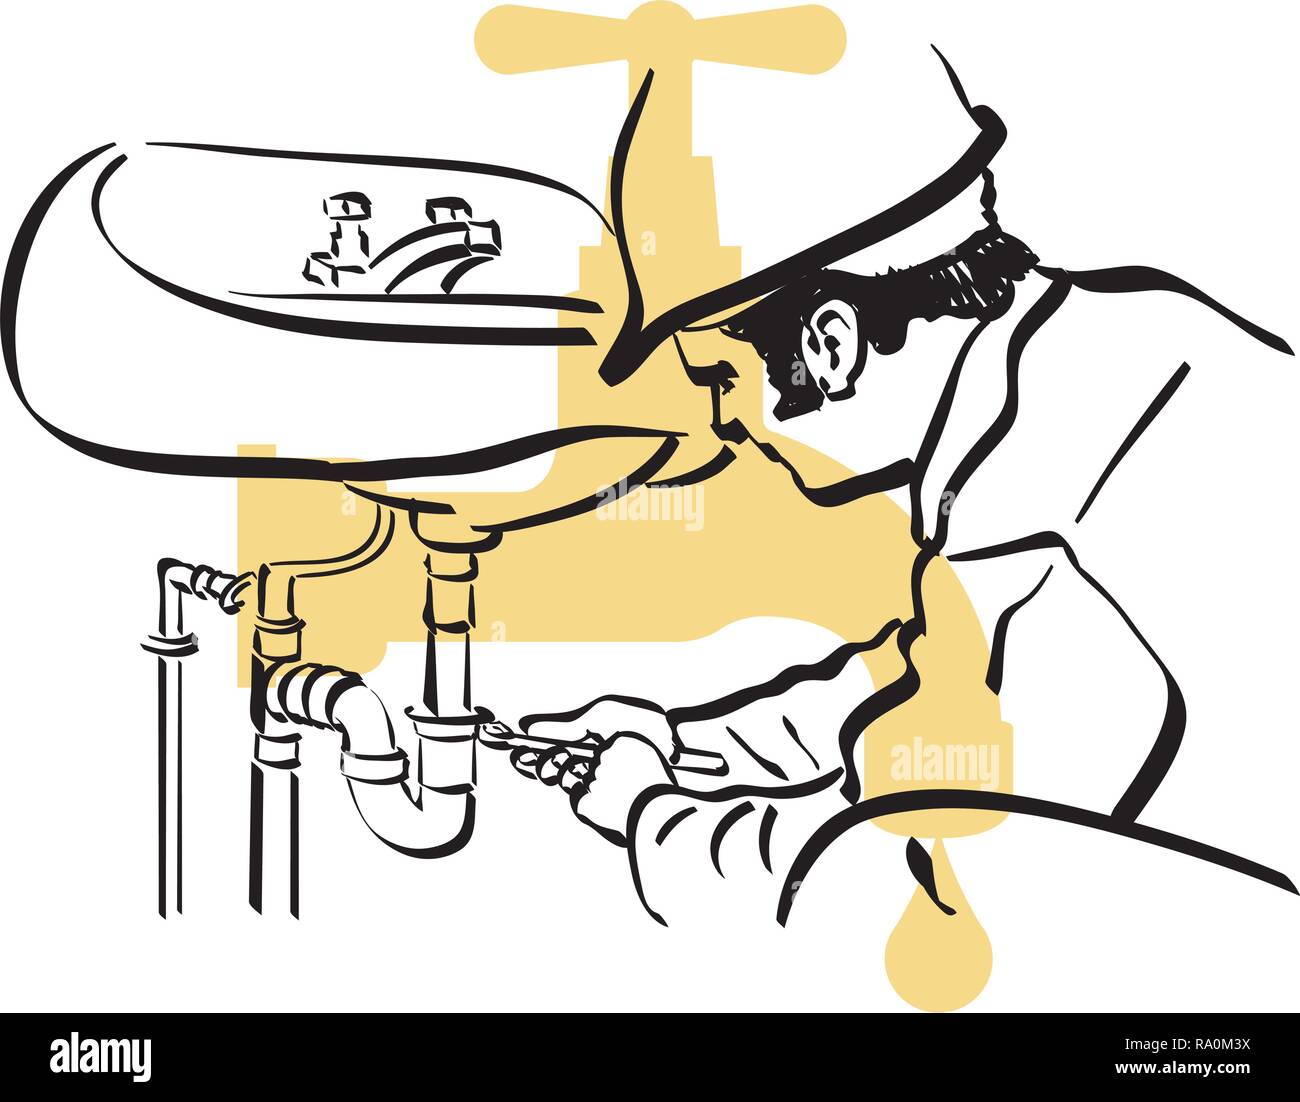 Illustration of a plumber to work Stock Vector